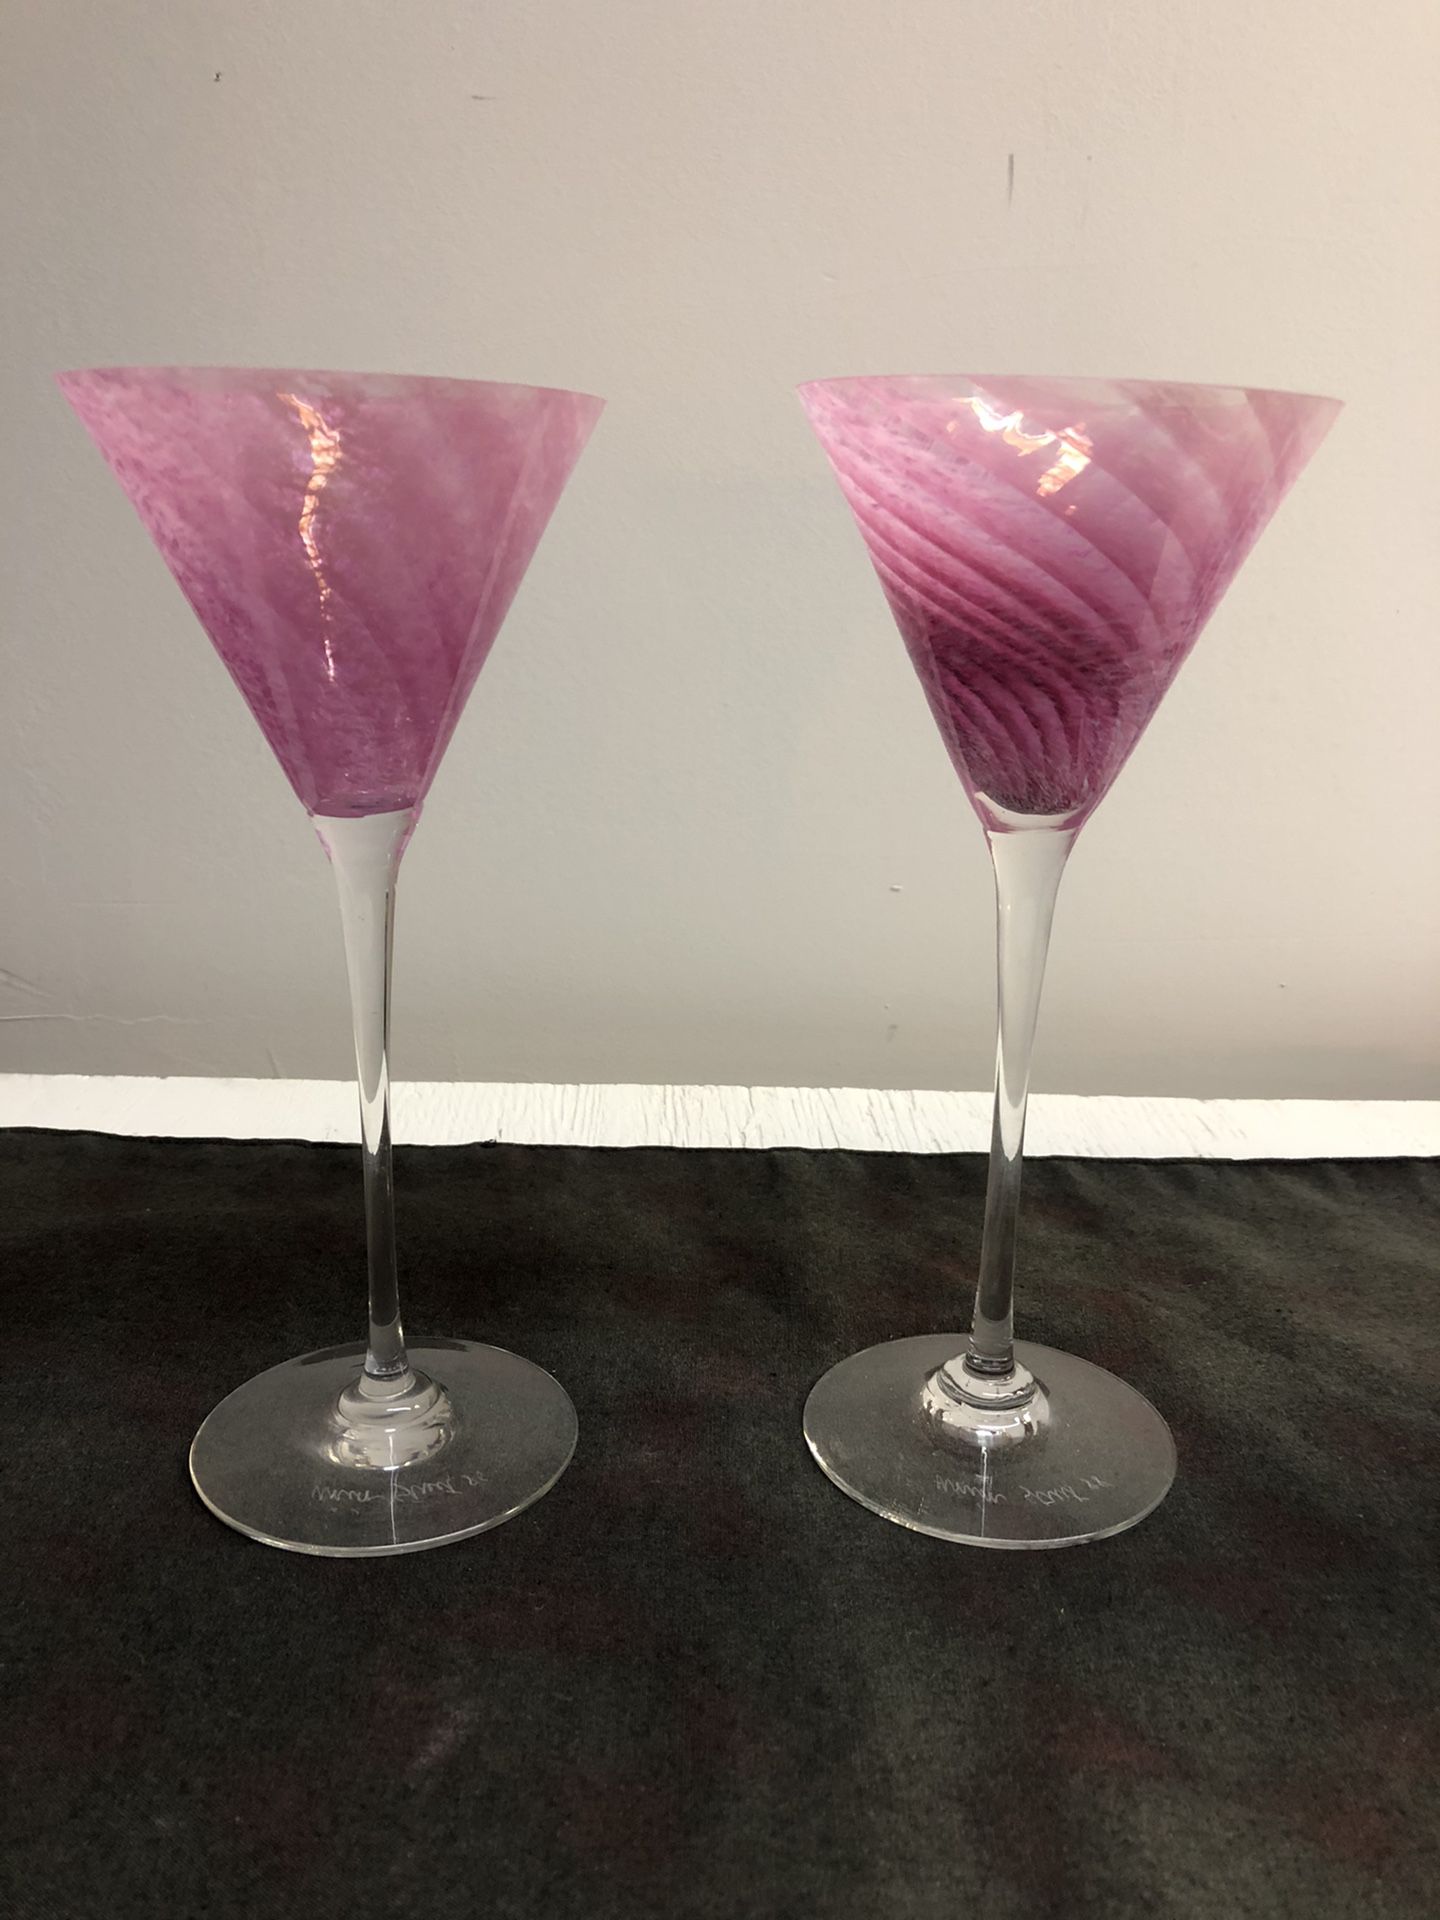 Vintage Union Street glass company martini glasses from 1988, signed